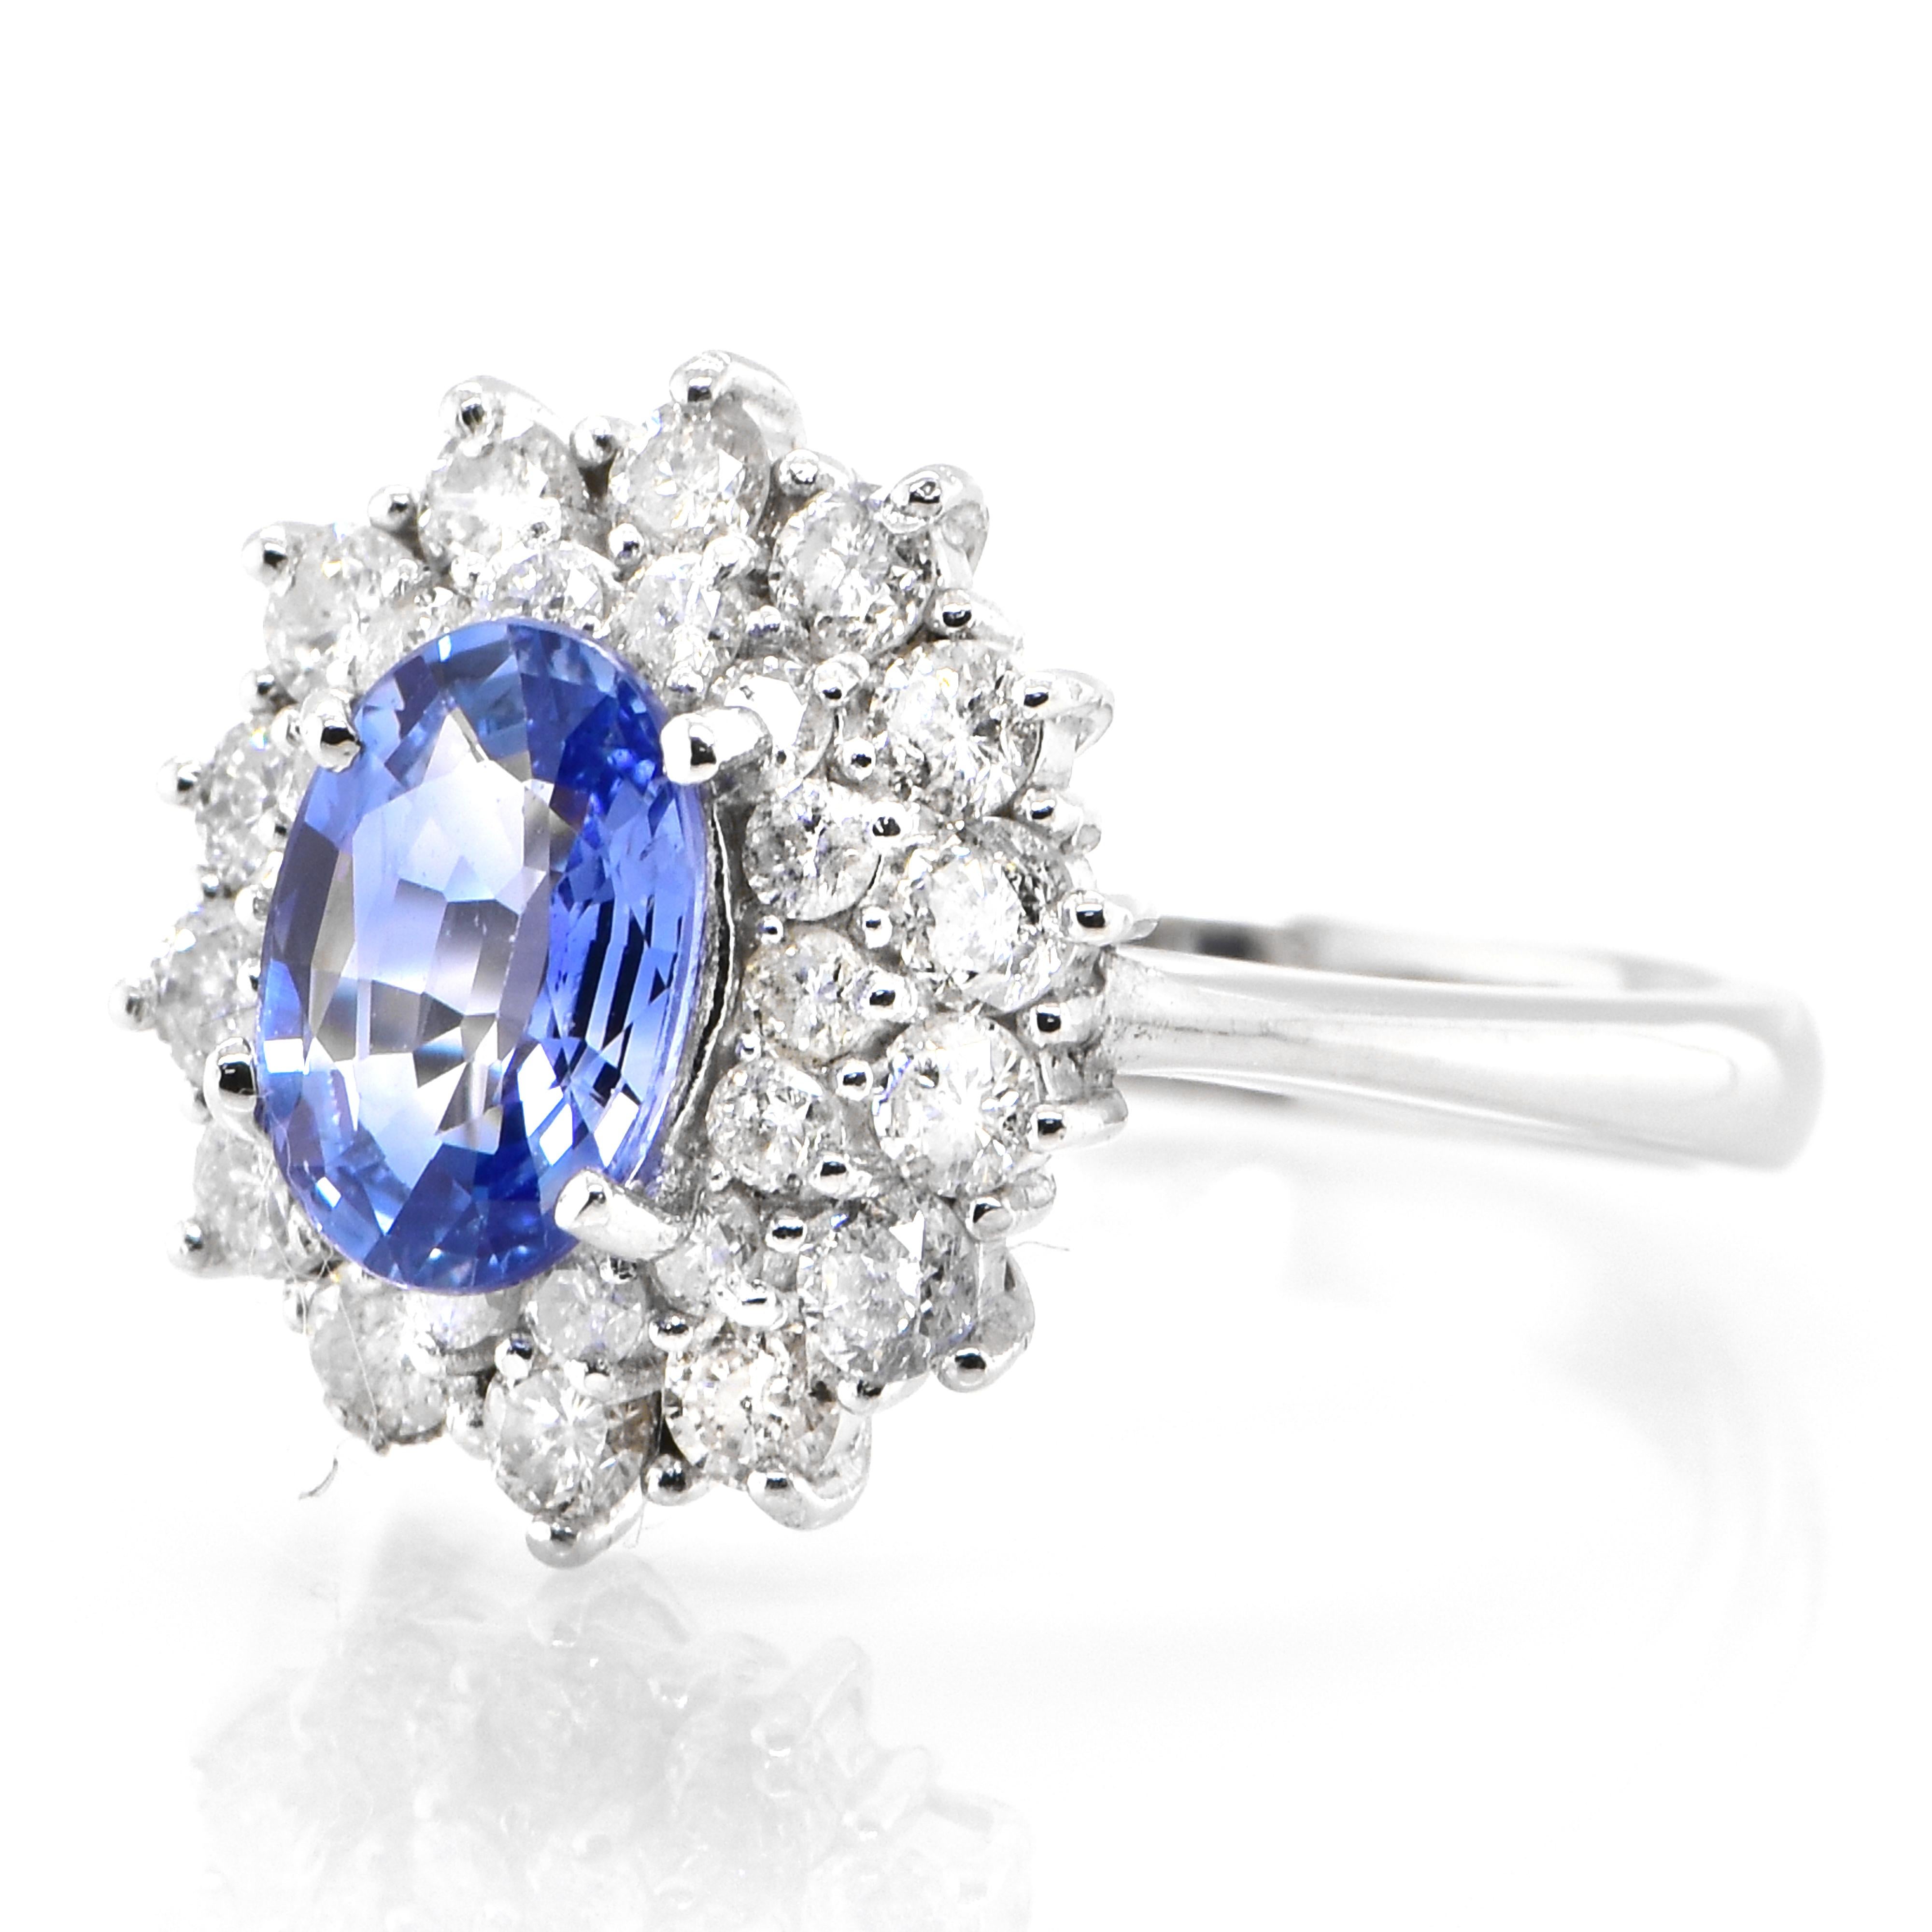 A beautiful ring featuring 1.35 Carat Natural Blue Sapphire and 1.00 Carats Diamond Accents set in Platinum. Sapphires have extraordinary durability - they excel in hardness as well as toughness and durability making them very popular in jewelry.